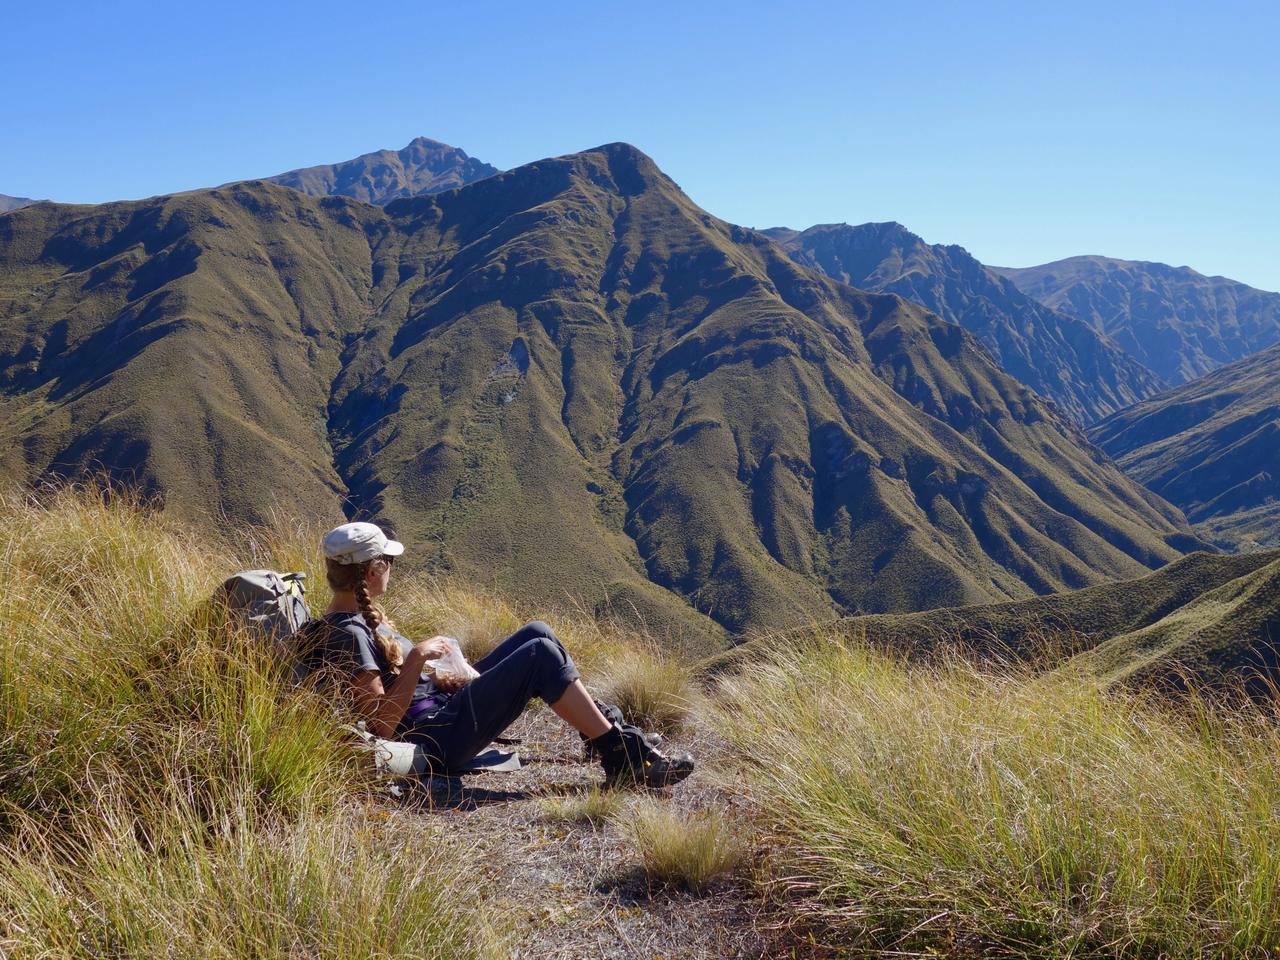 Melbourne woman Laura Waters left behind the comforts of modern life to hike 3000km in the wilds of New Zealand. Pics to go with extract of her book Bewildered (Affirm Press, RRP $29.99)